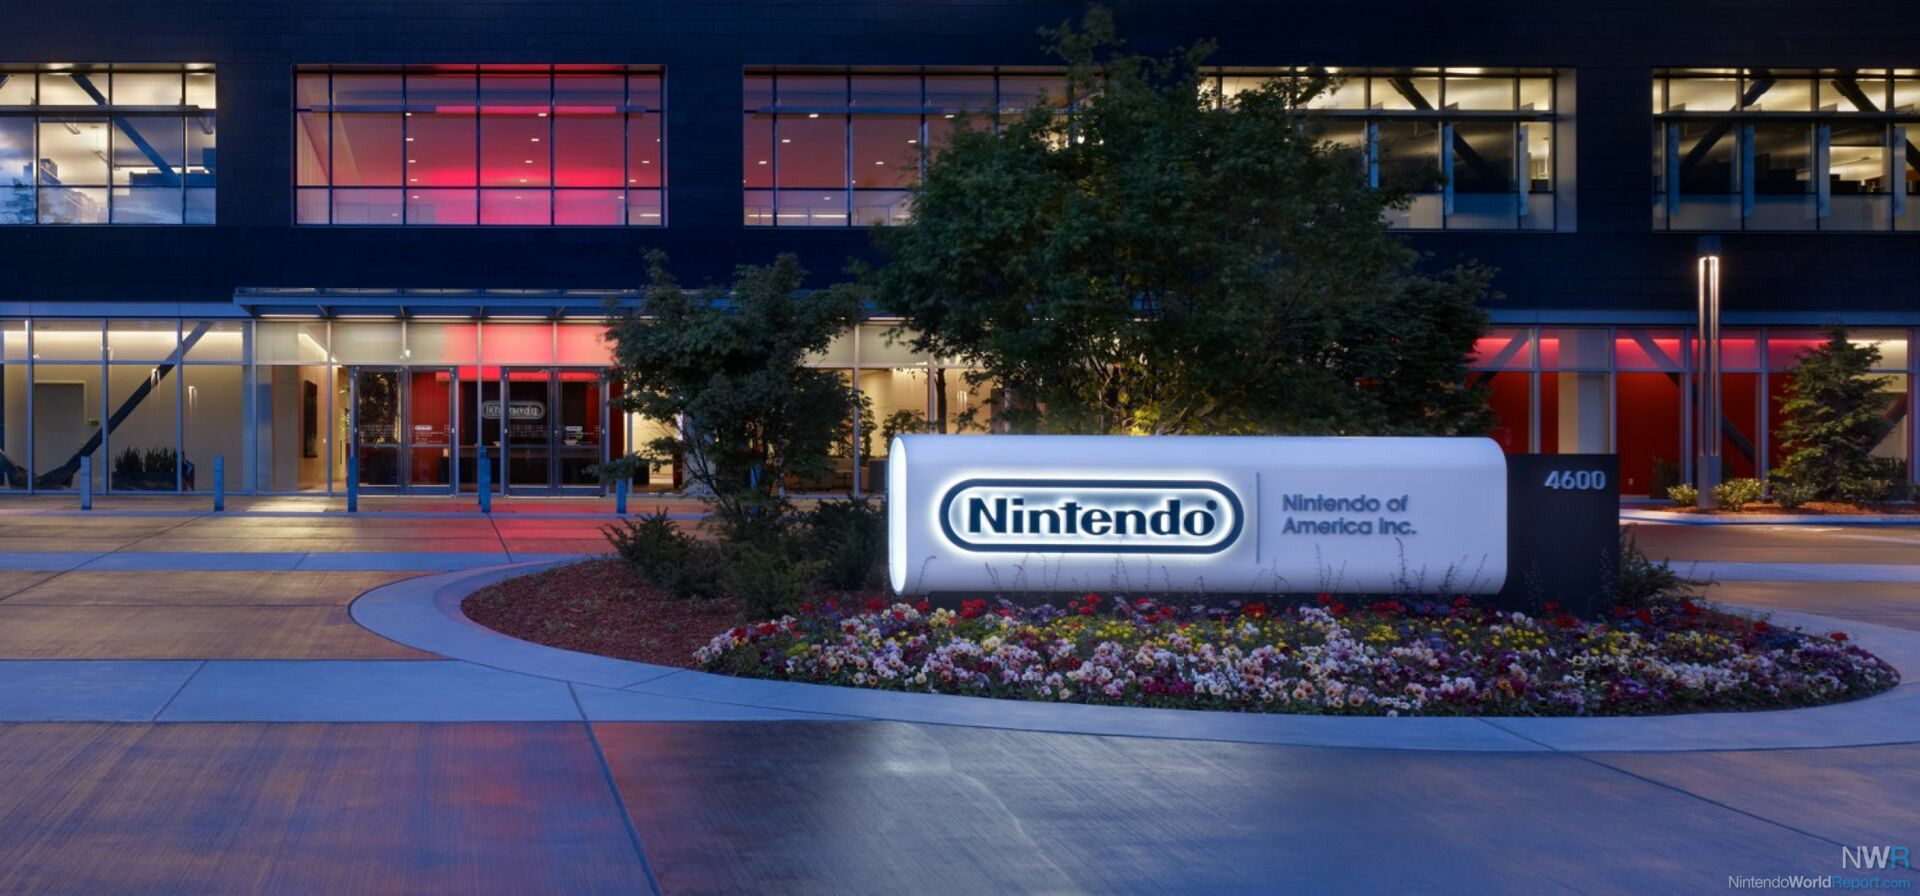 Nintendo and staffing agency met with NLRB labor complaint - Polygon